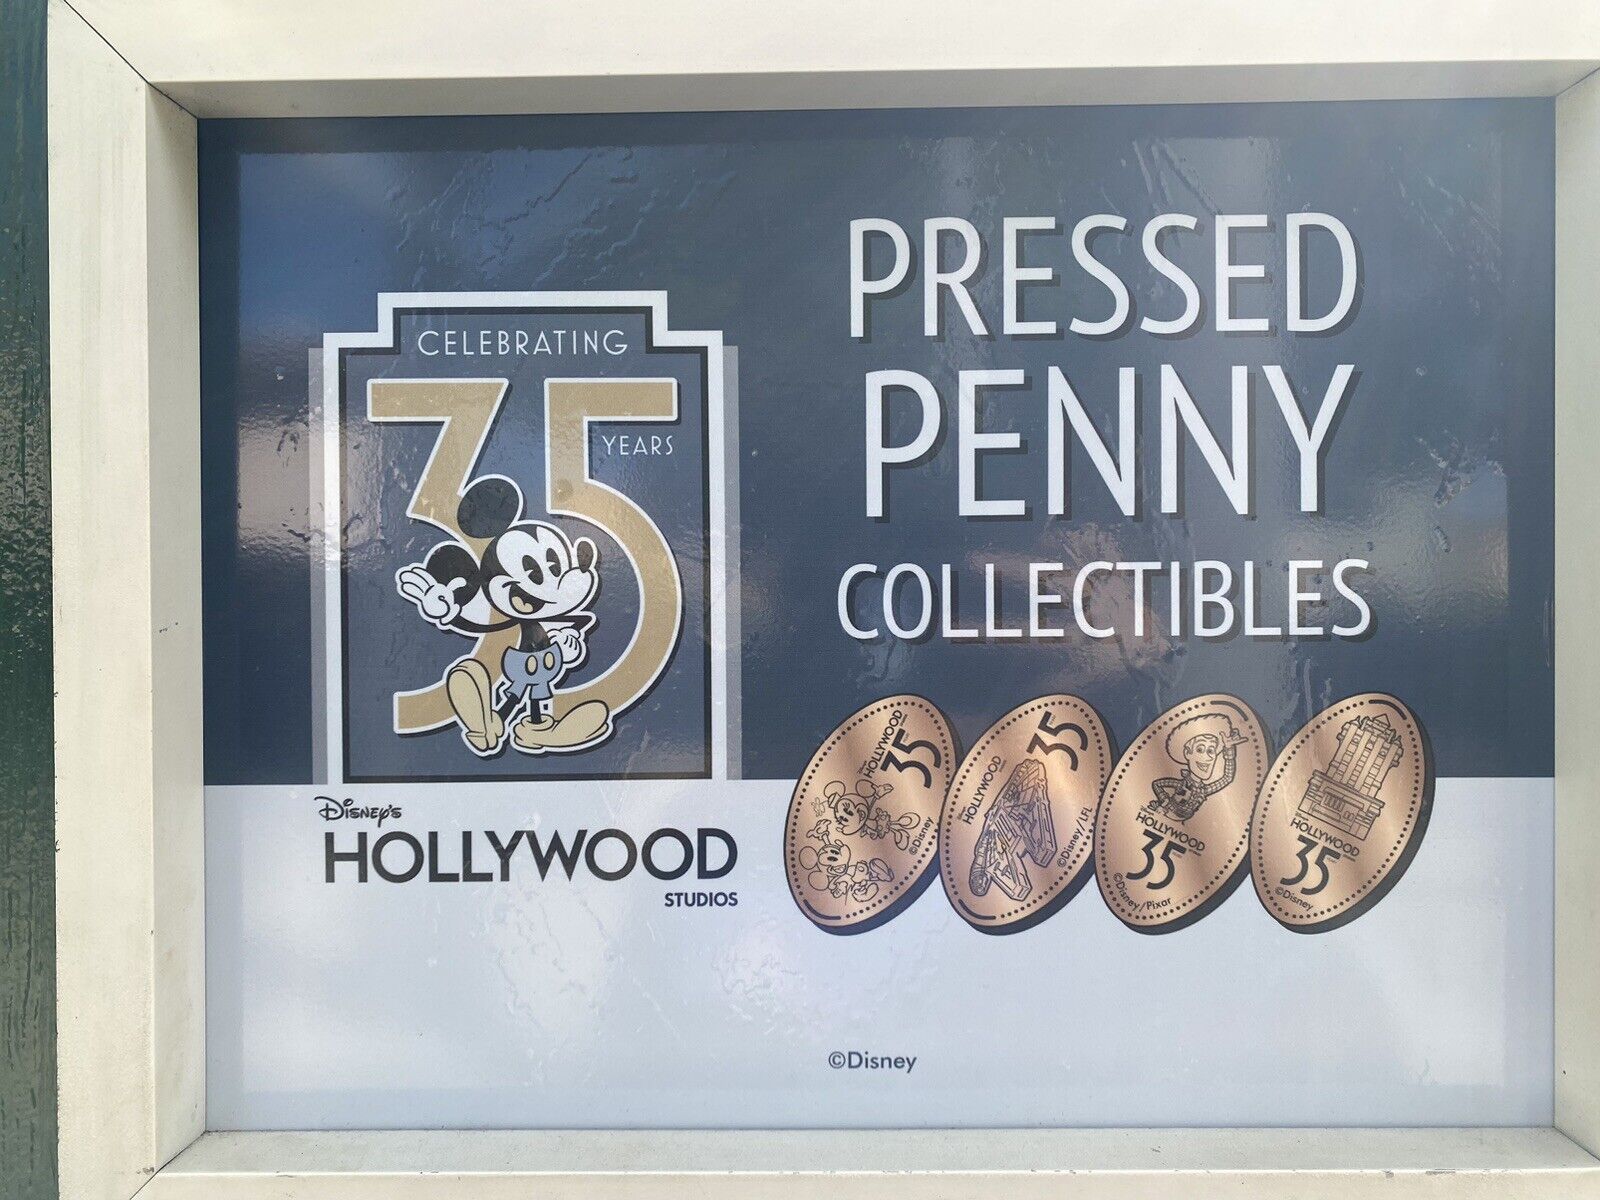 Disney Parks Hollywood Studios 35th Anniversary Penny Press Pressed Coin NEW